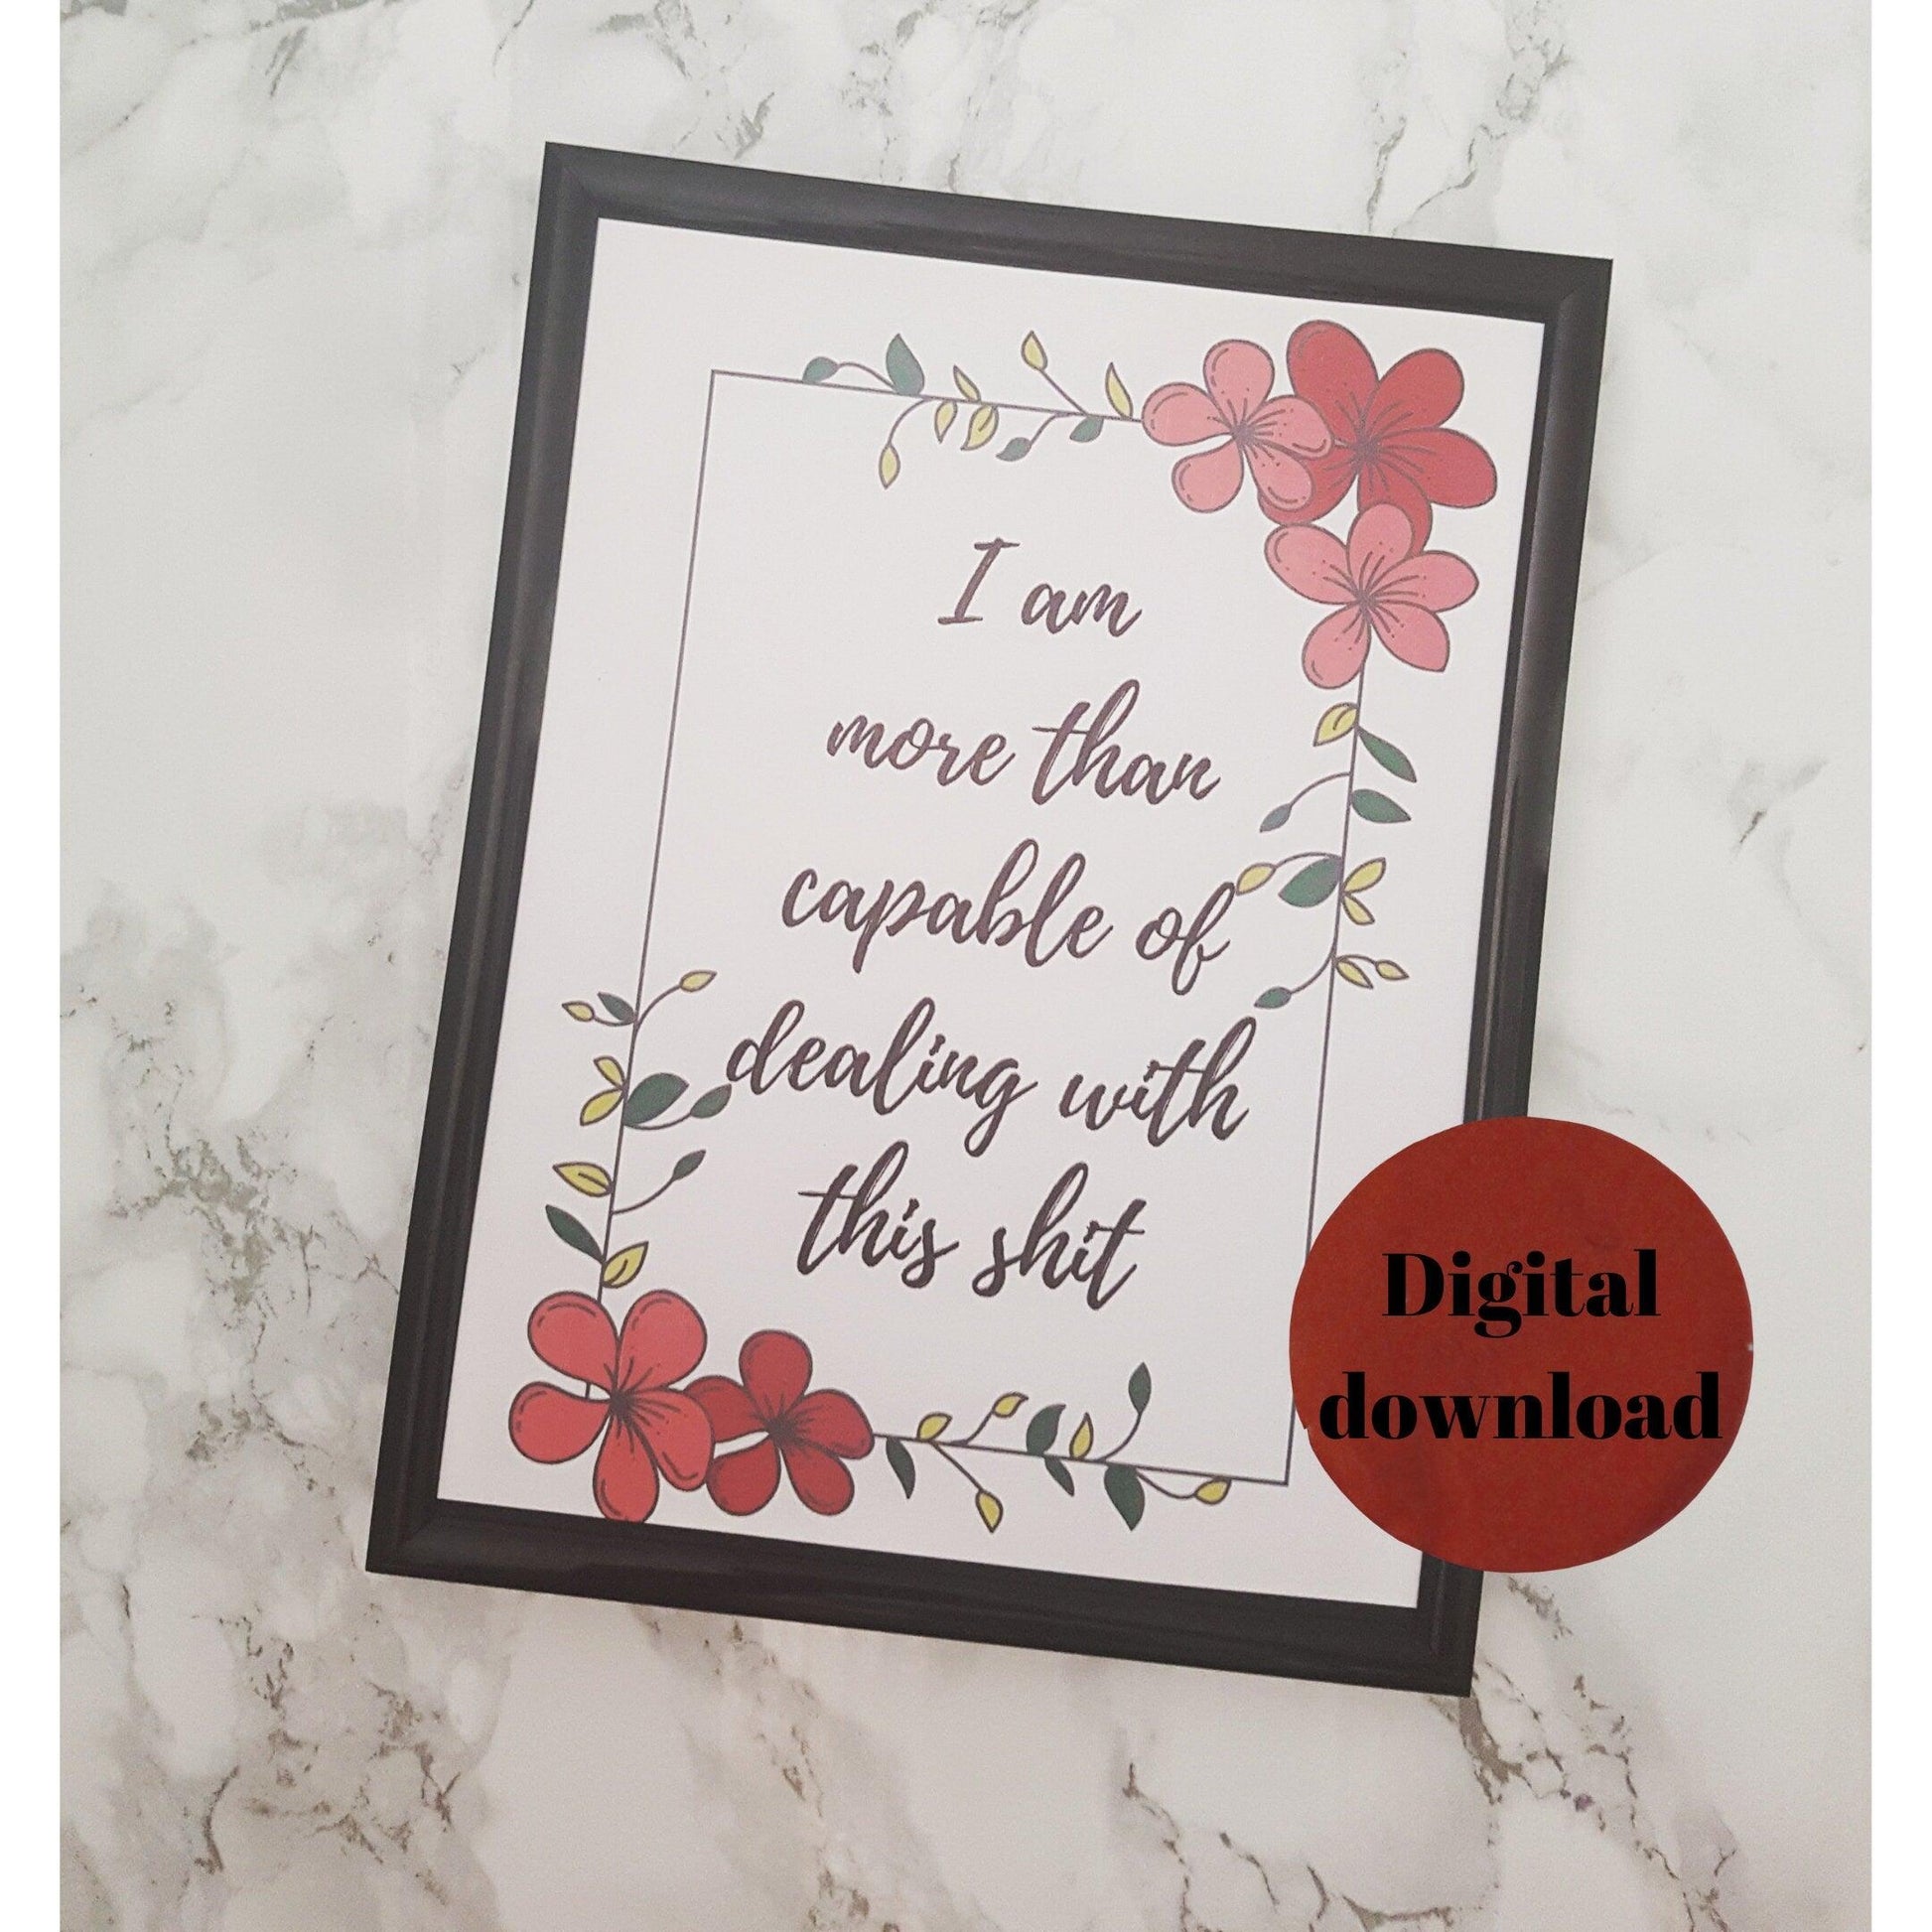 I am more than capable... - digital download motivational quote - Thistleflat Crafts